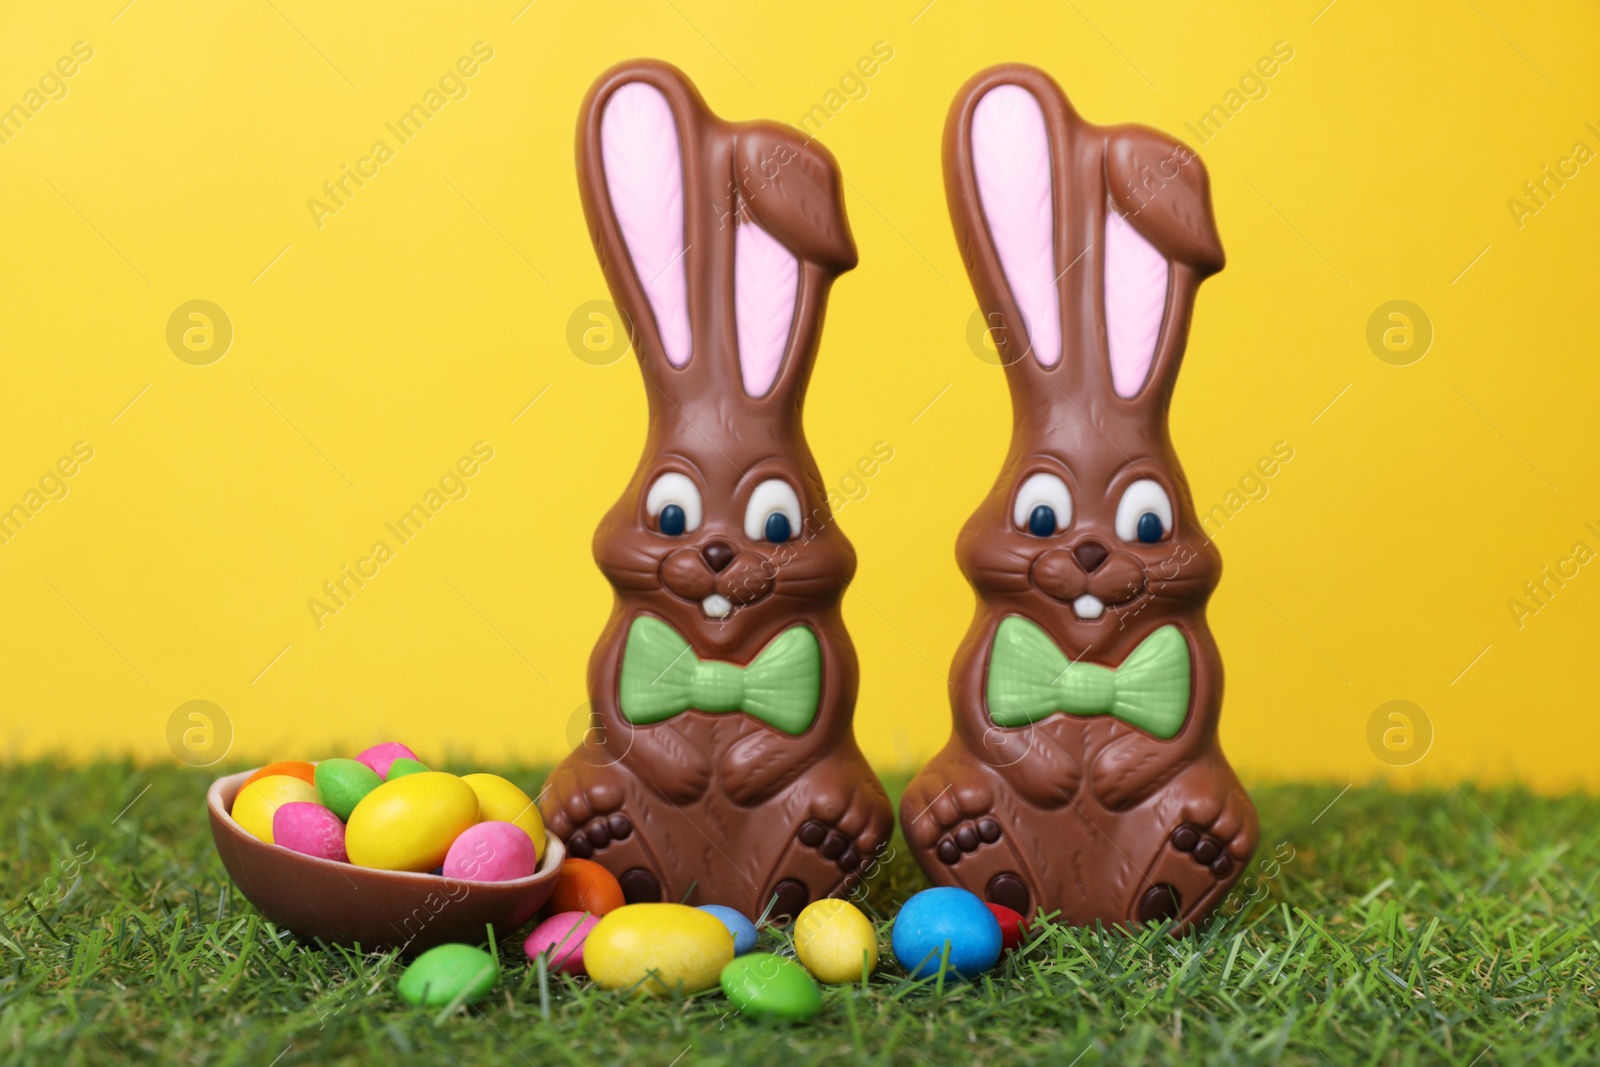 Photo of Easter celebration. Funny chocolate bunnies and half of sweet egg with small candies on grass against yellow background